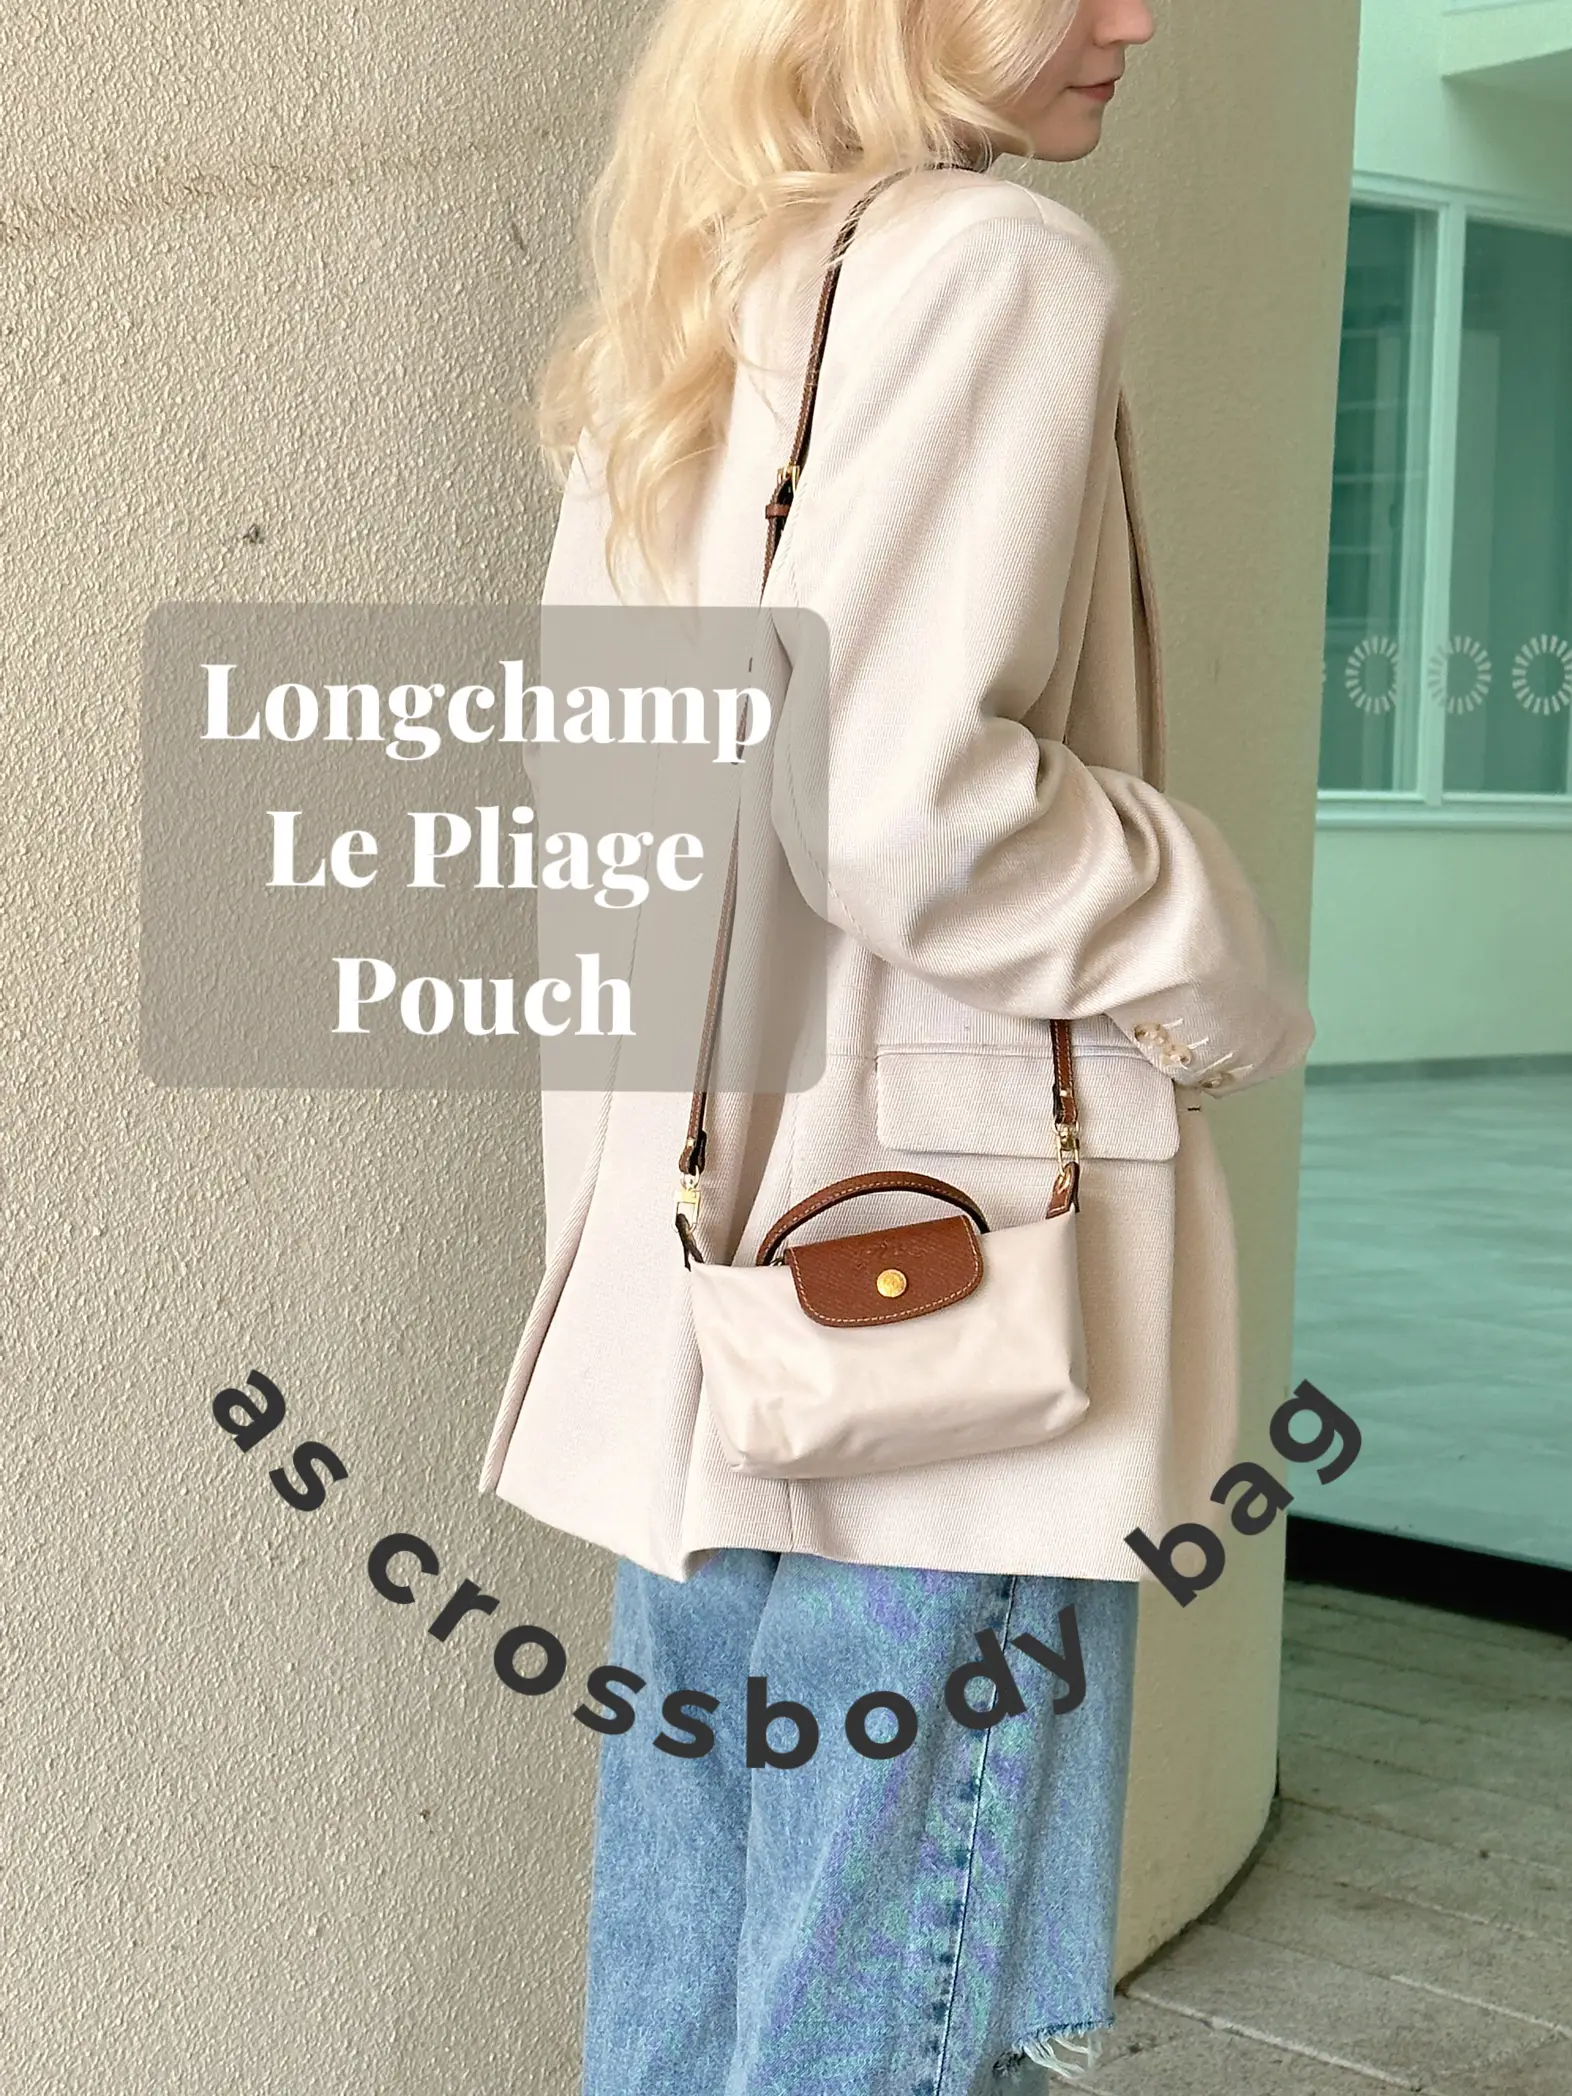 LONGCHAMP LE PLIAGE POUCH With Handle to mini CROSSBODY bag, HOW TO, MOD SHOTS